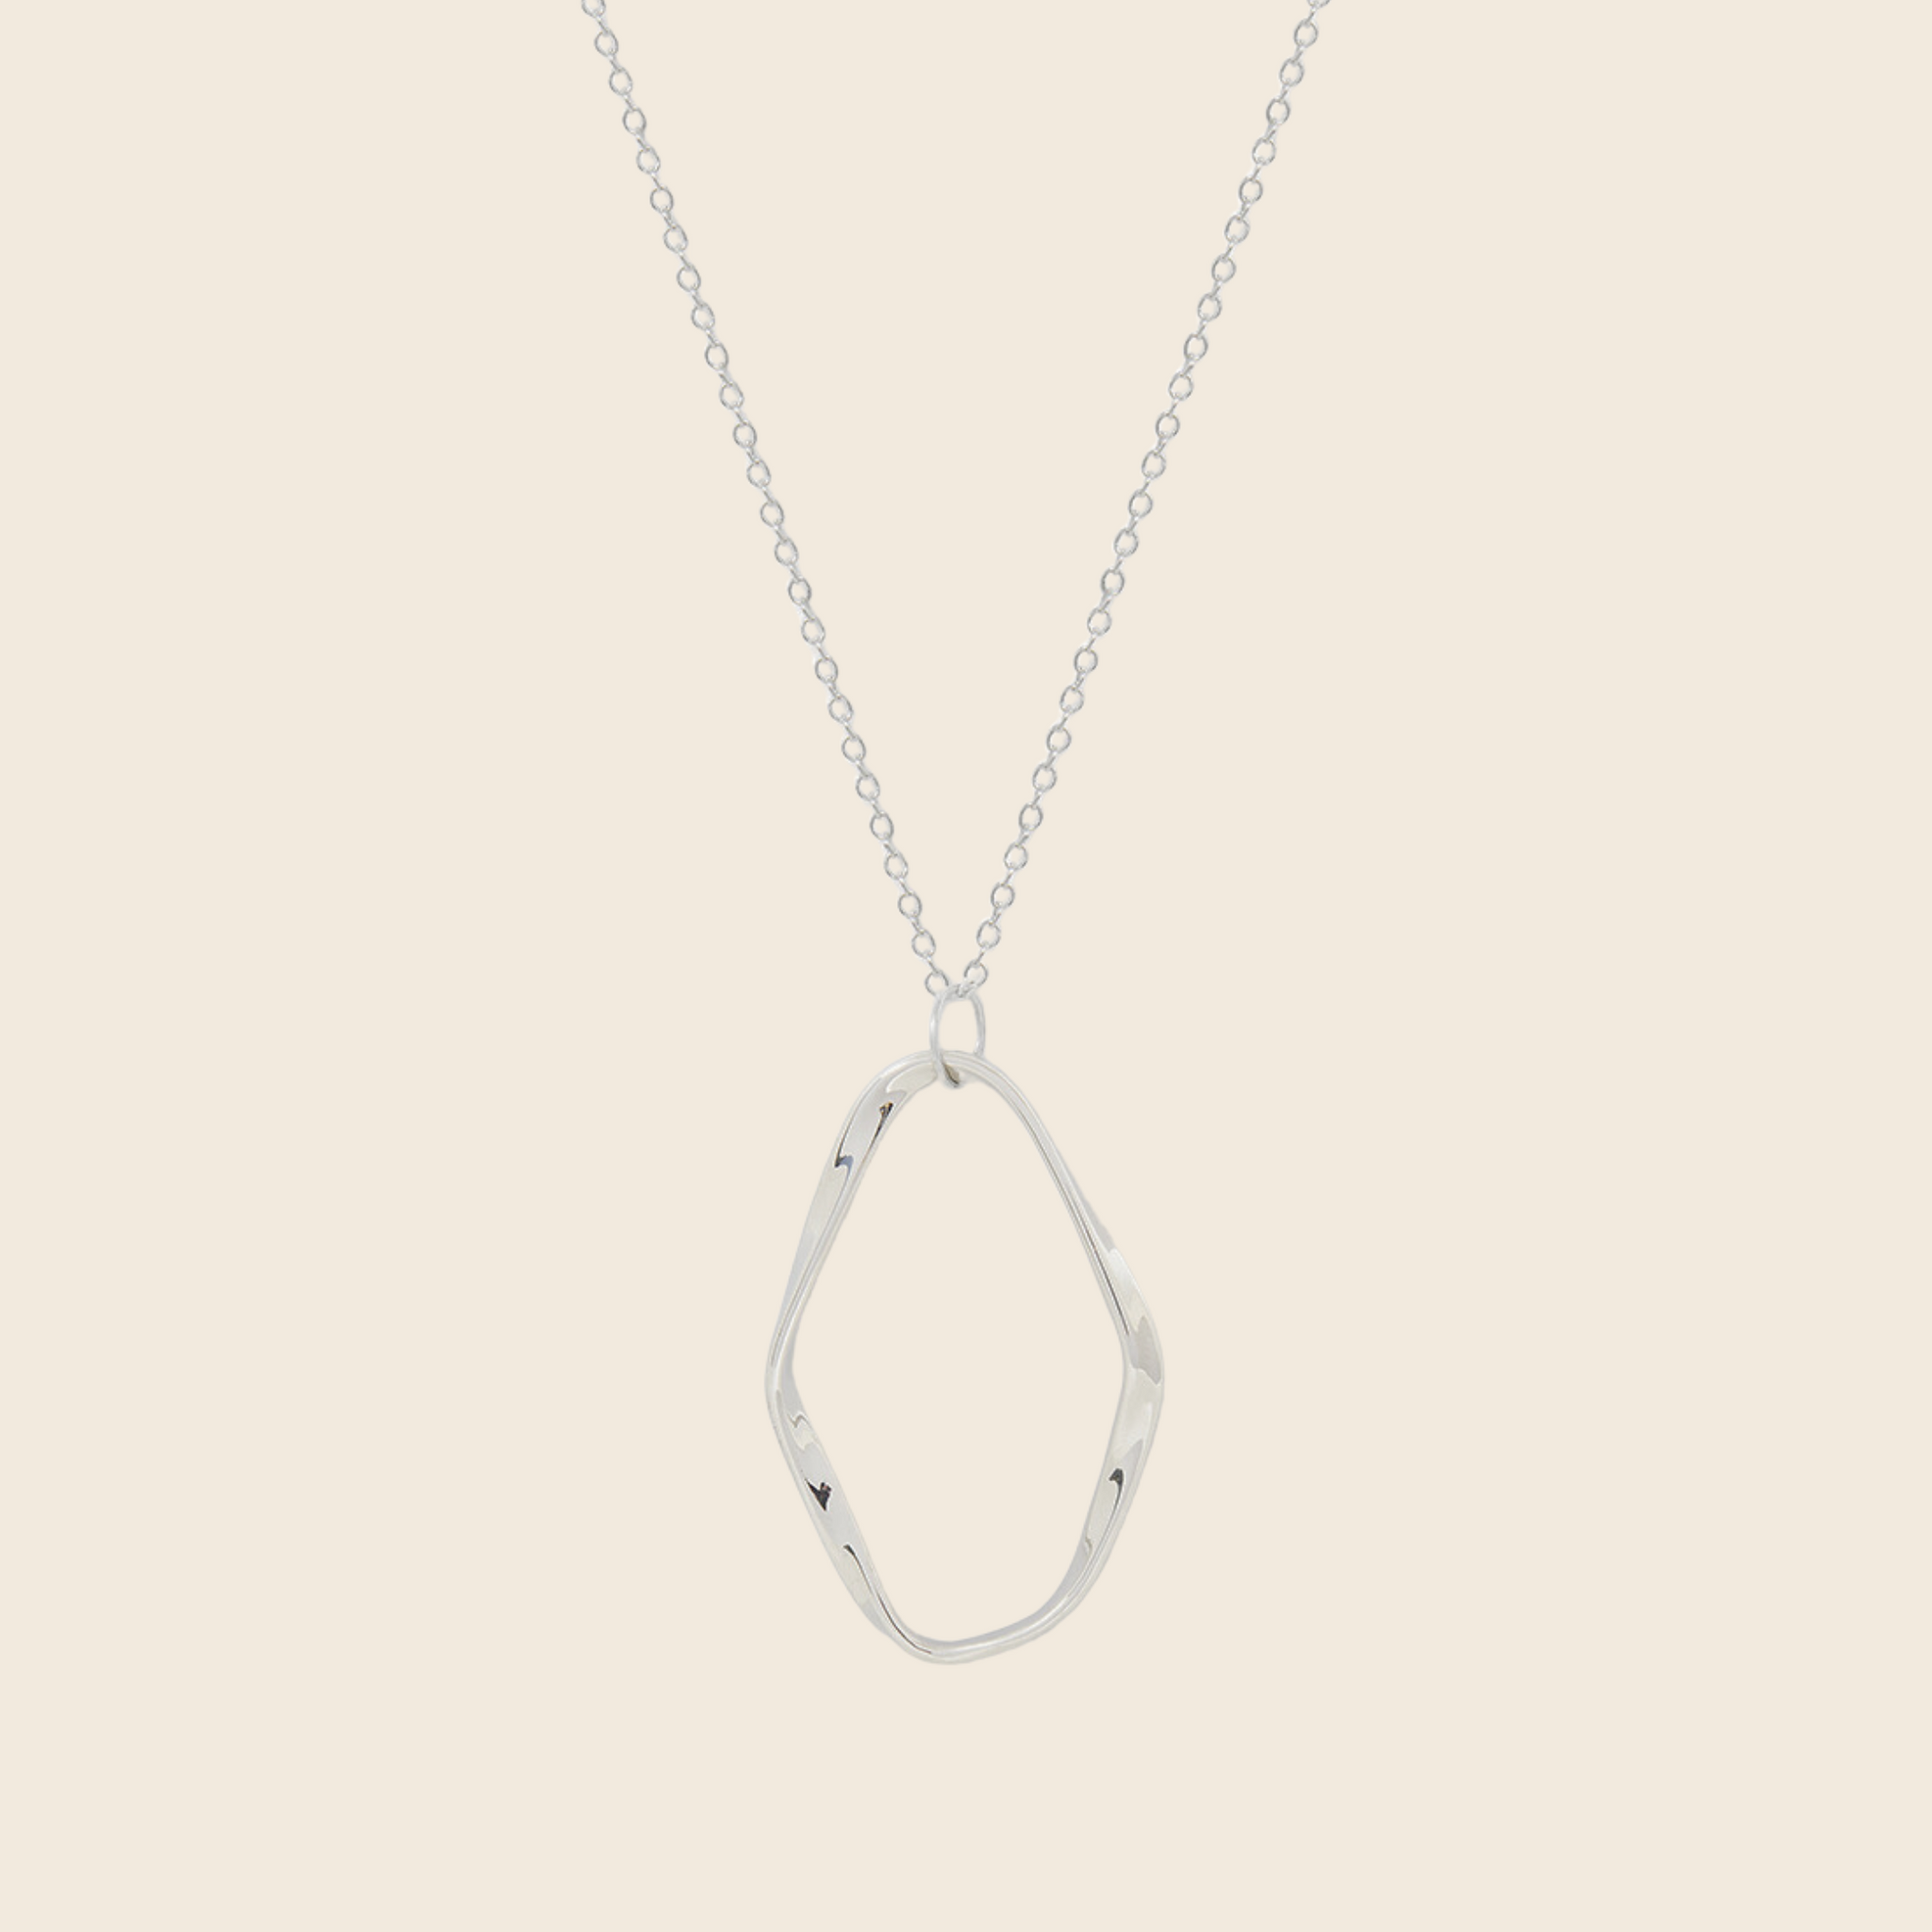 A Weathered Penny Farah Necklace in Silver